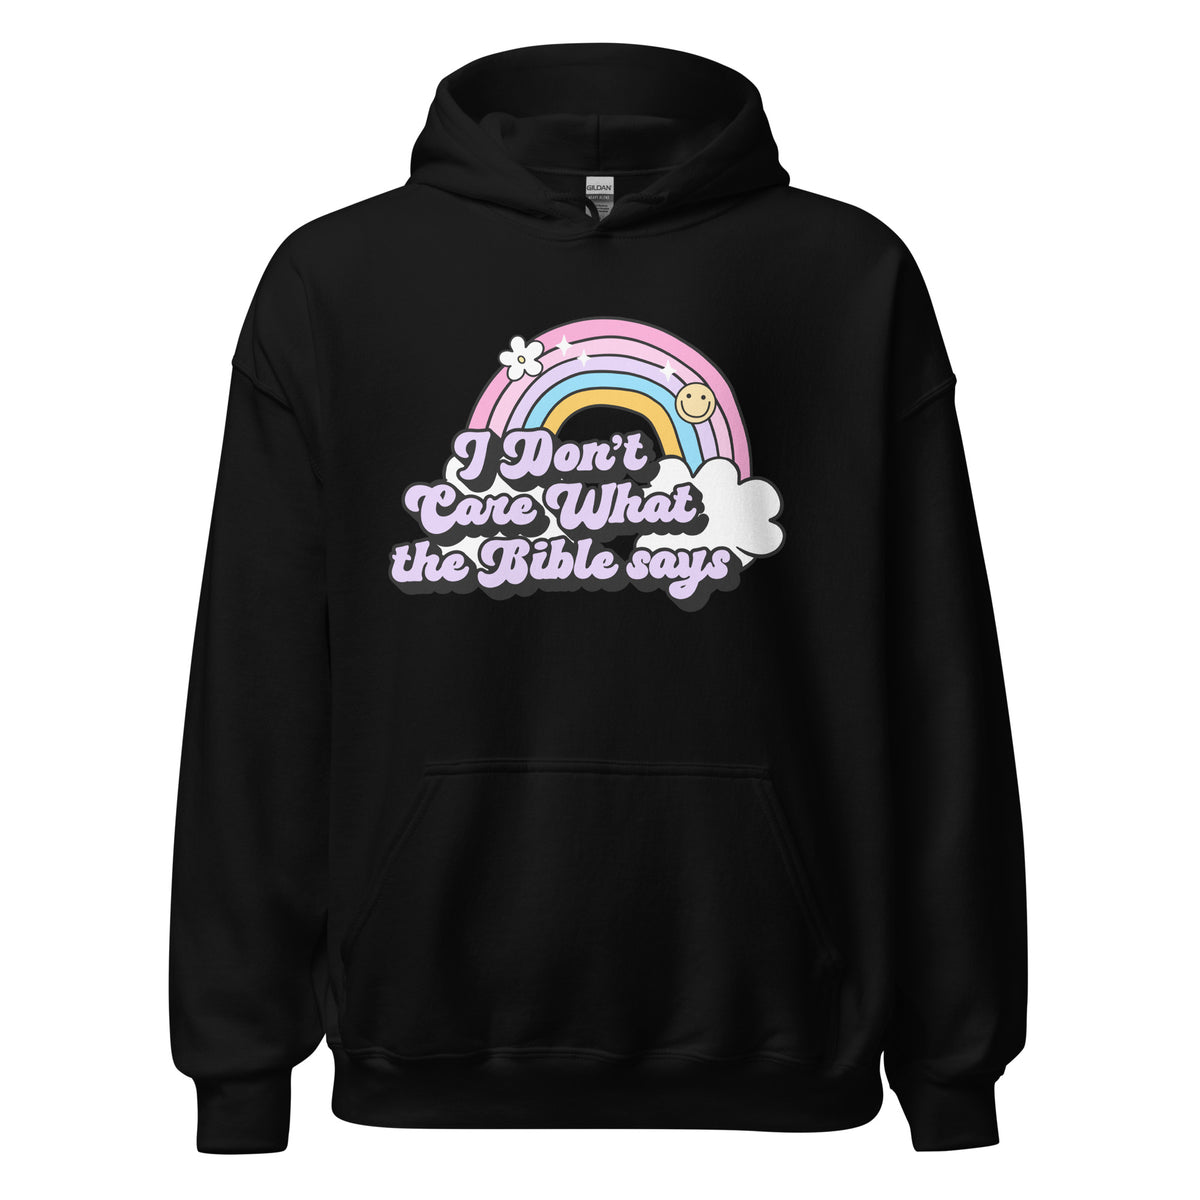 I Don't Care What the Bible Says Hoodie